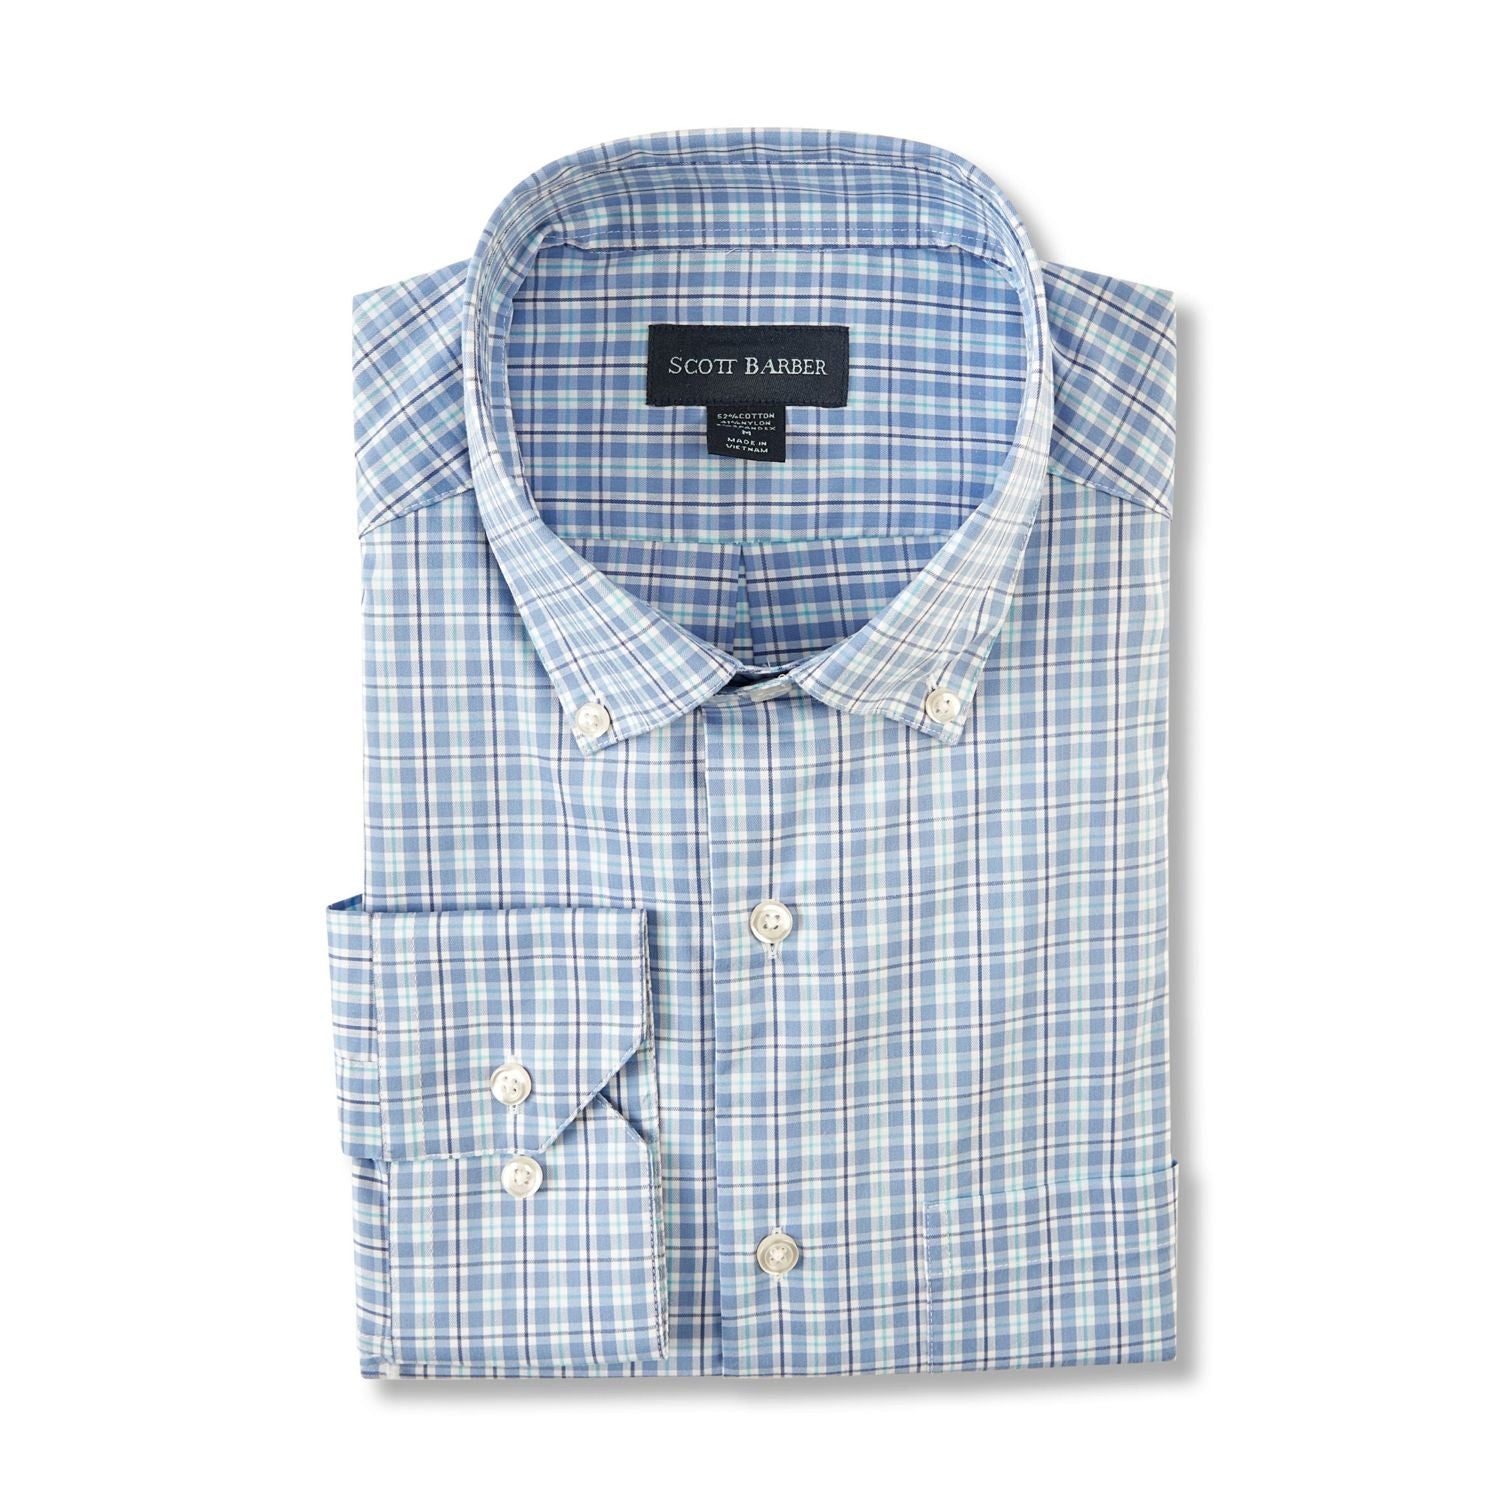 Performance Check Sport Shirt in Regal Blue by Scott Barber